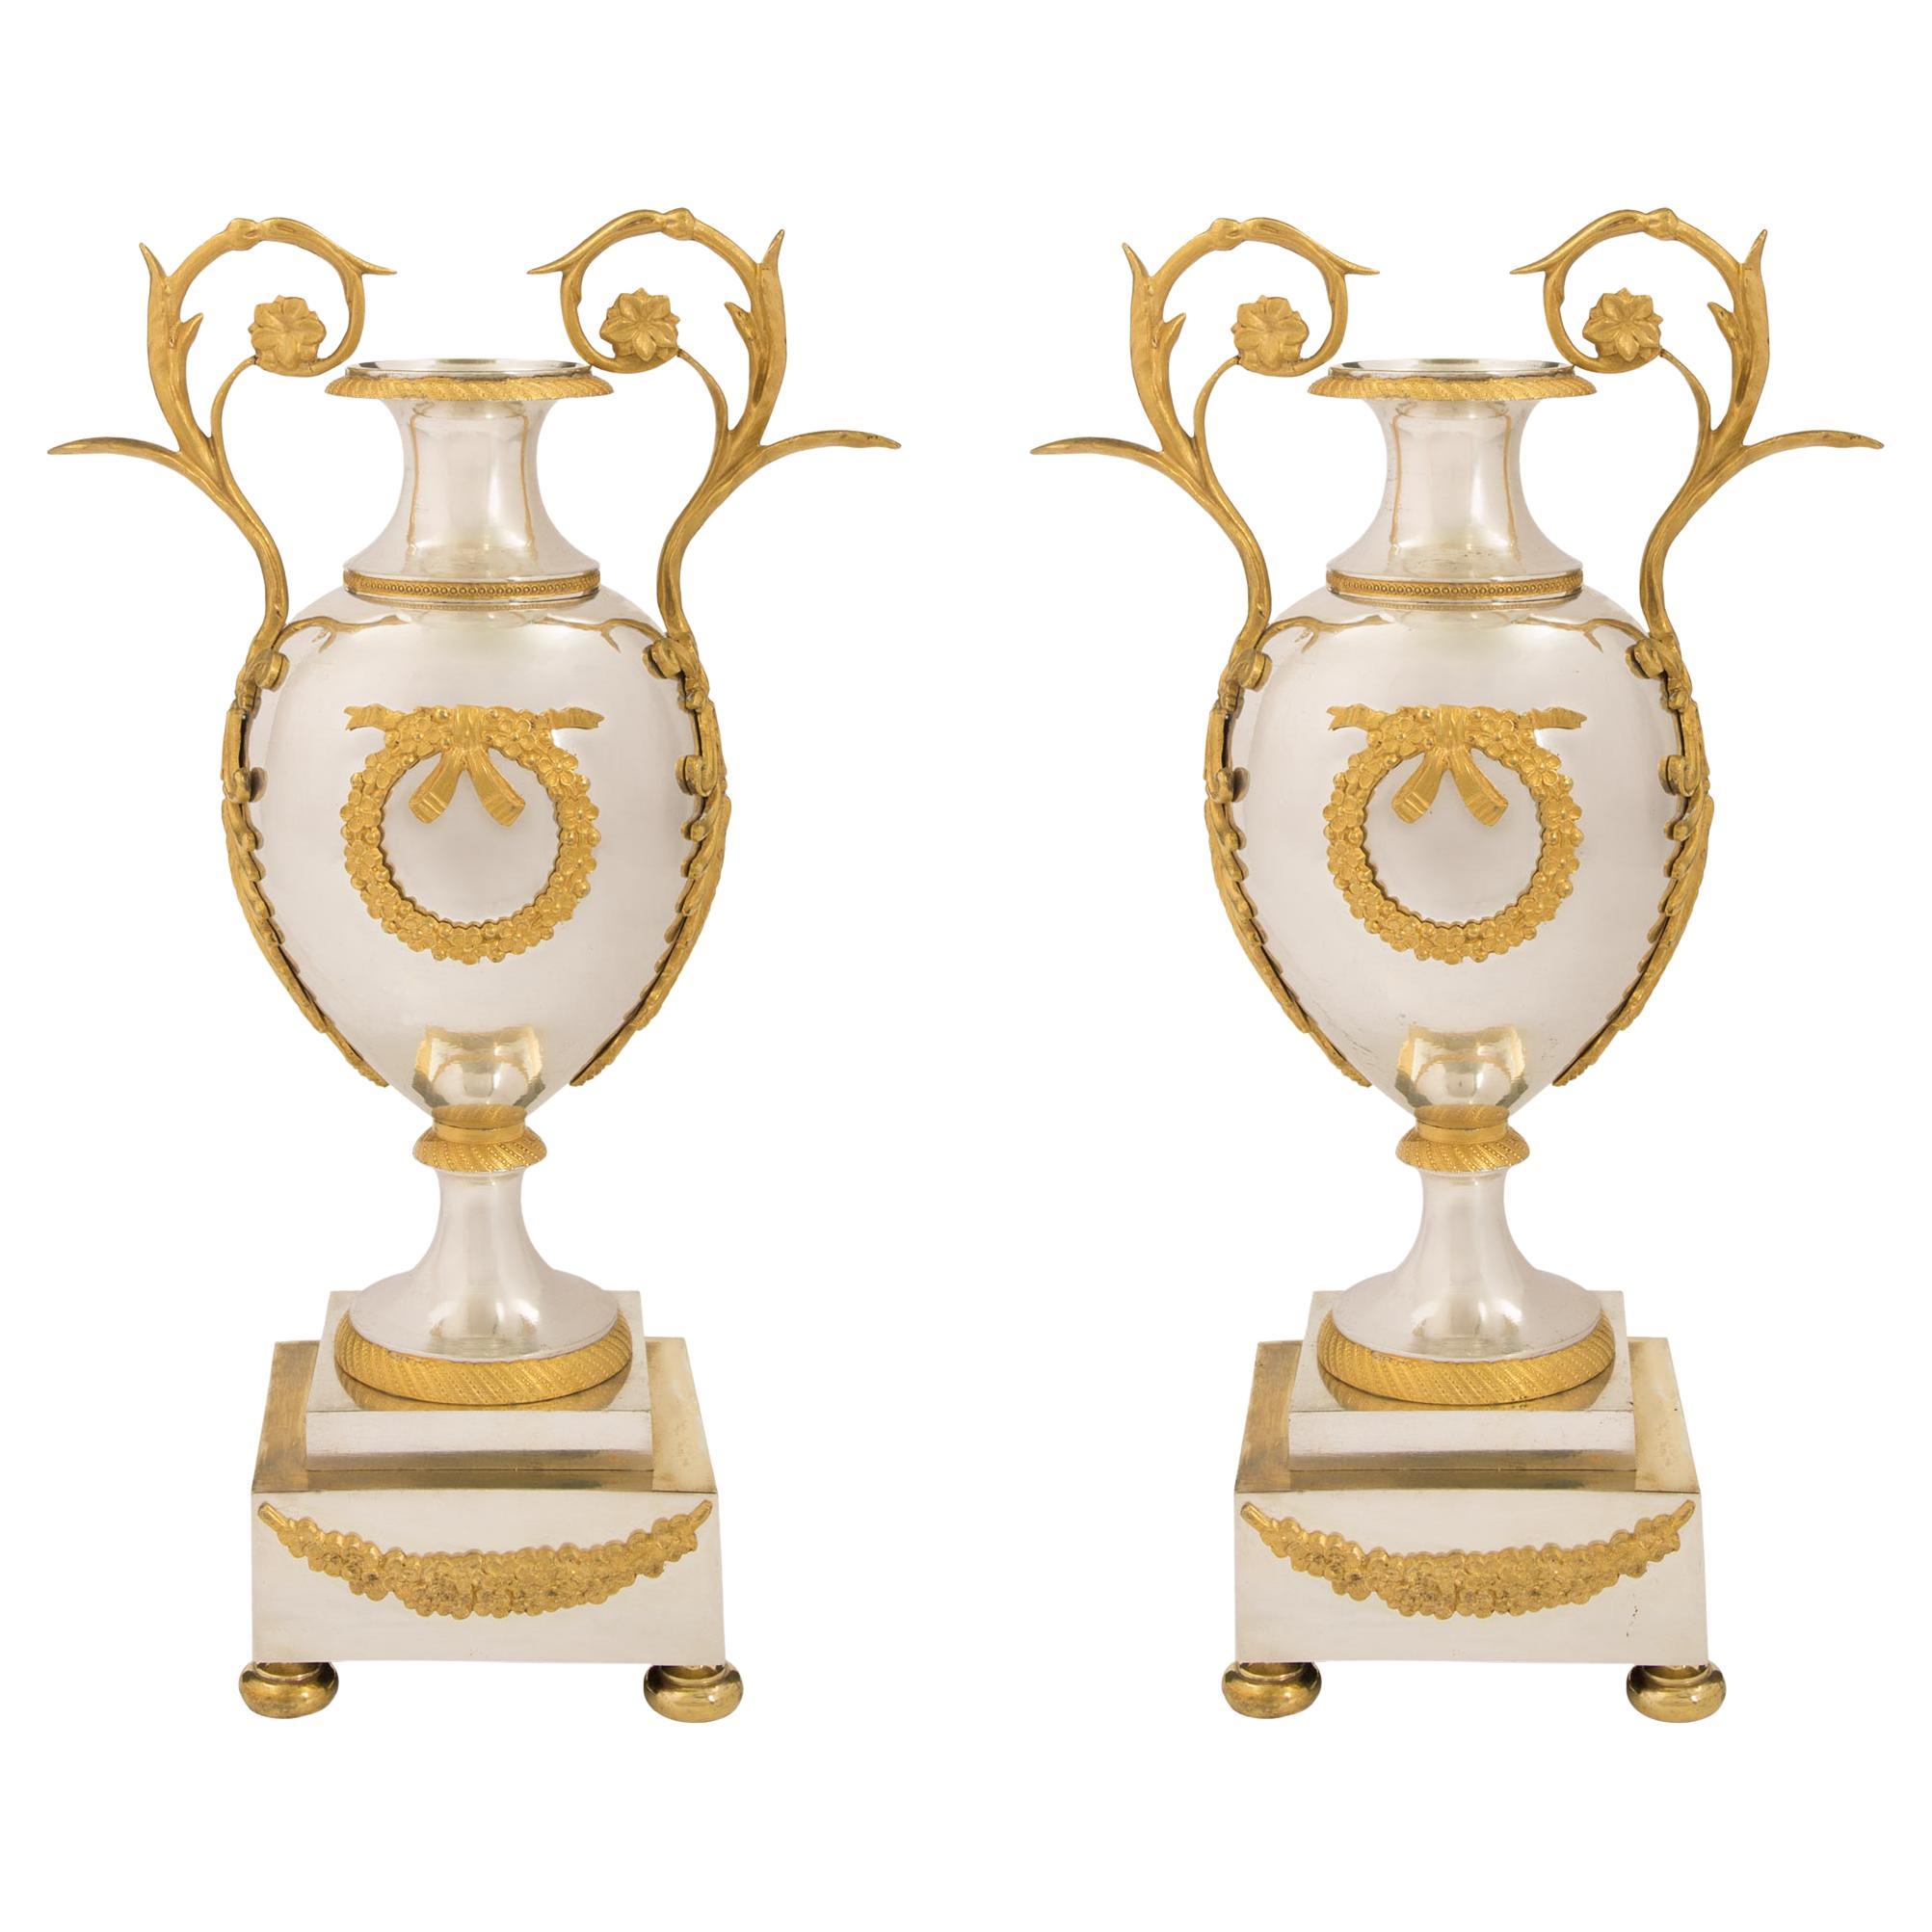 Pair of French Early 19th Century Neoclassical Style Ormolu and Bronze Urns